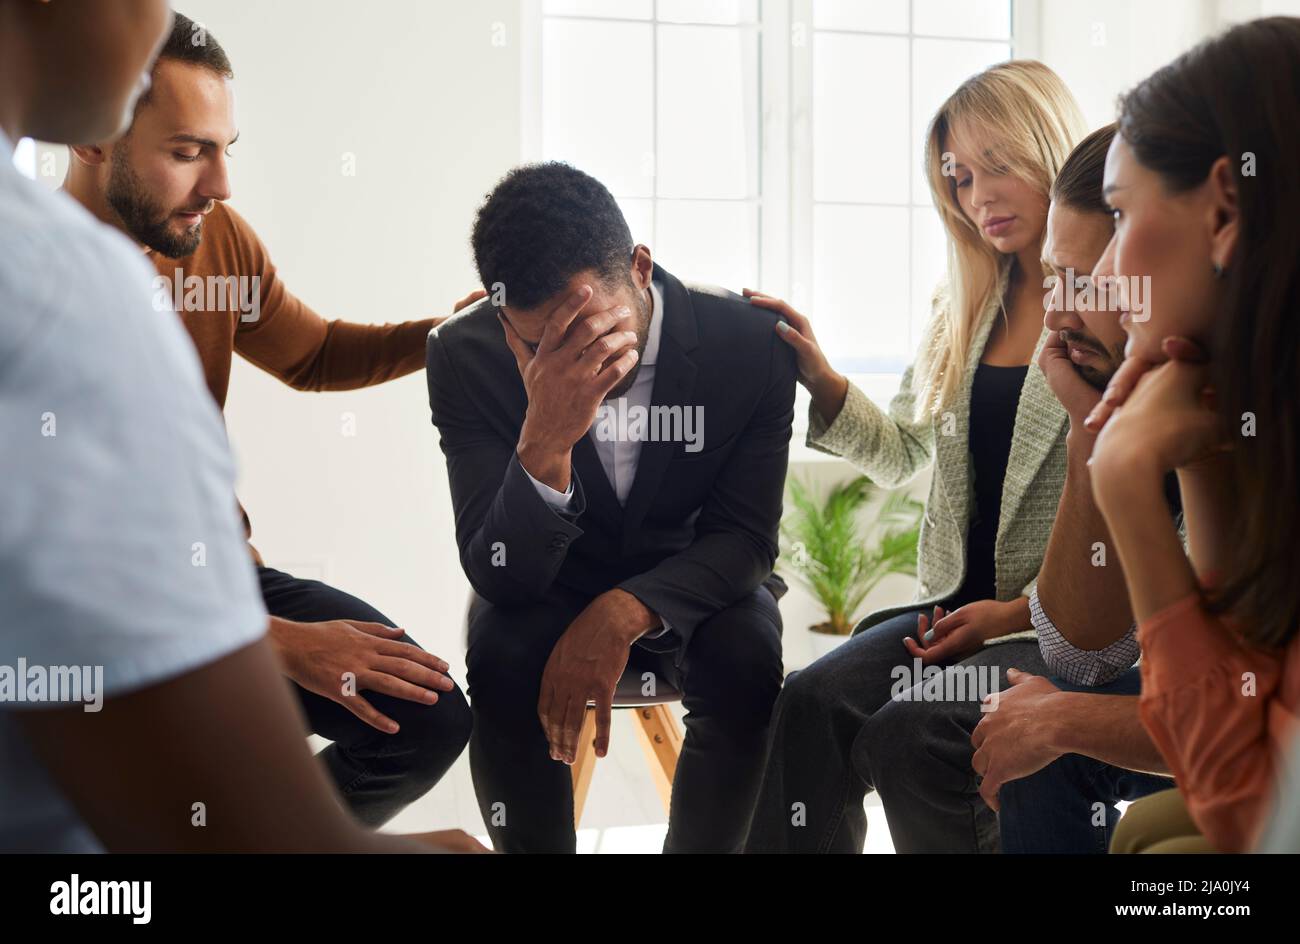 Caring people support stressed male friend at group session Stock Photo